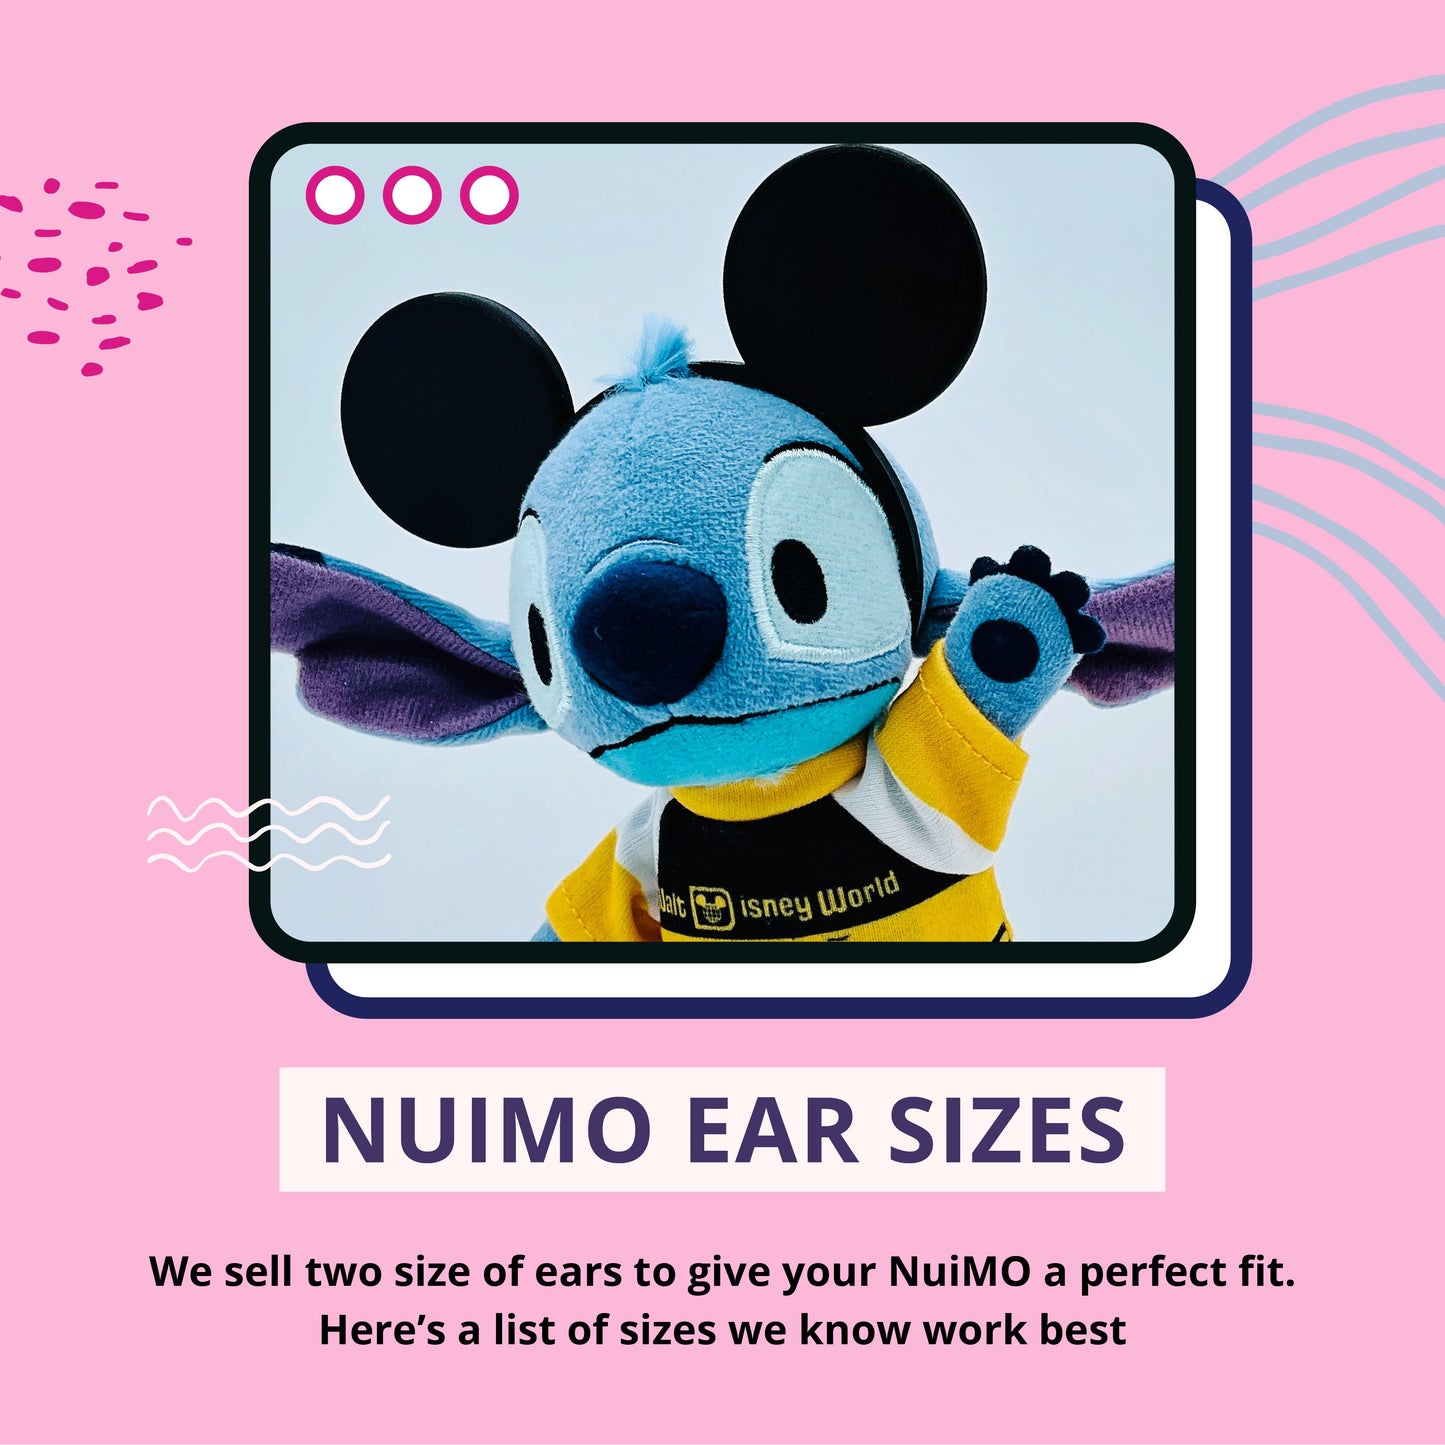 Star Wars First Order Ears for NuiMO Plushes